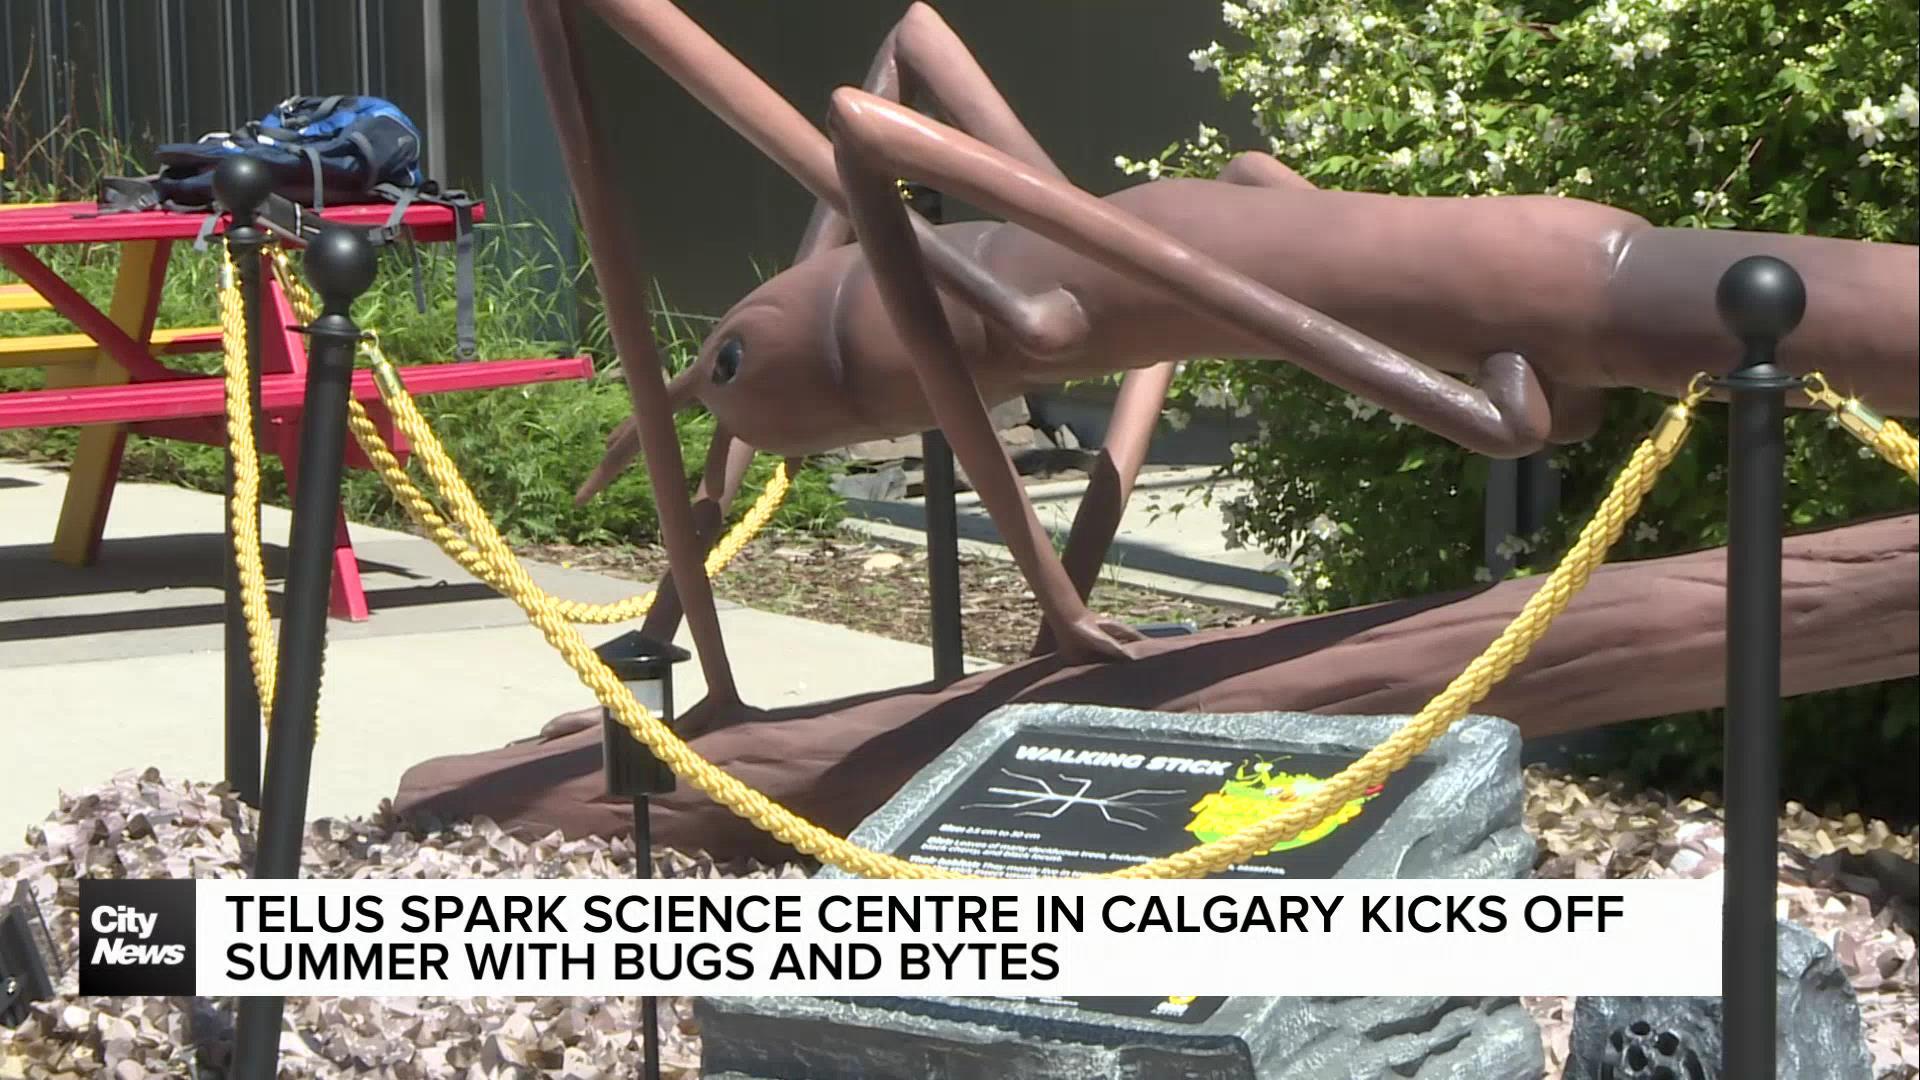 Telus Spark Science Centre in Calgary kicks off summer with Bugs and Bytes